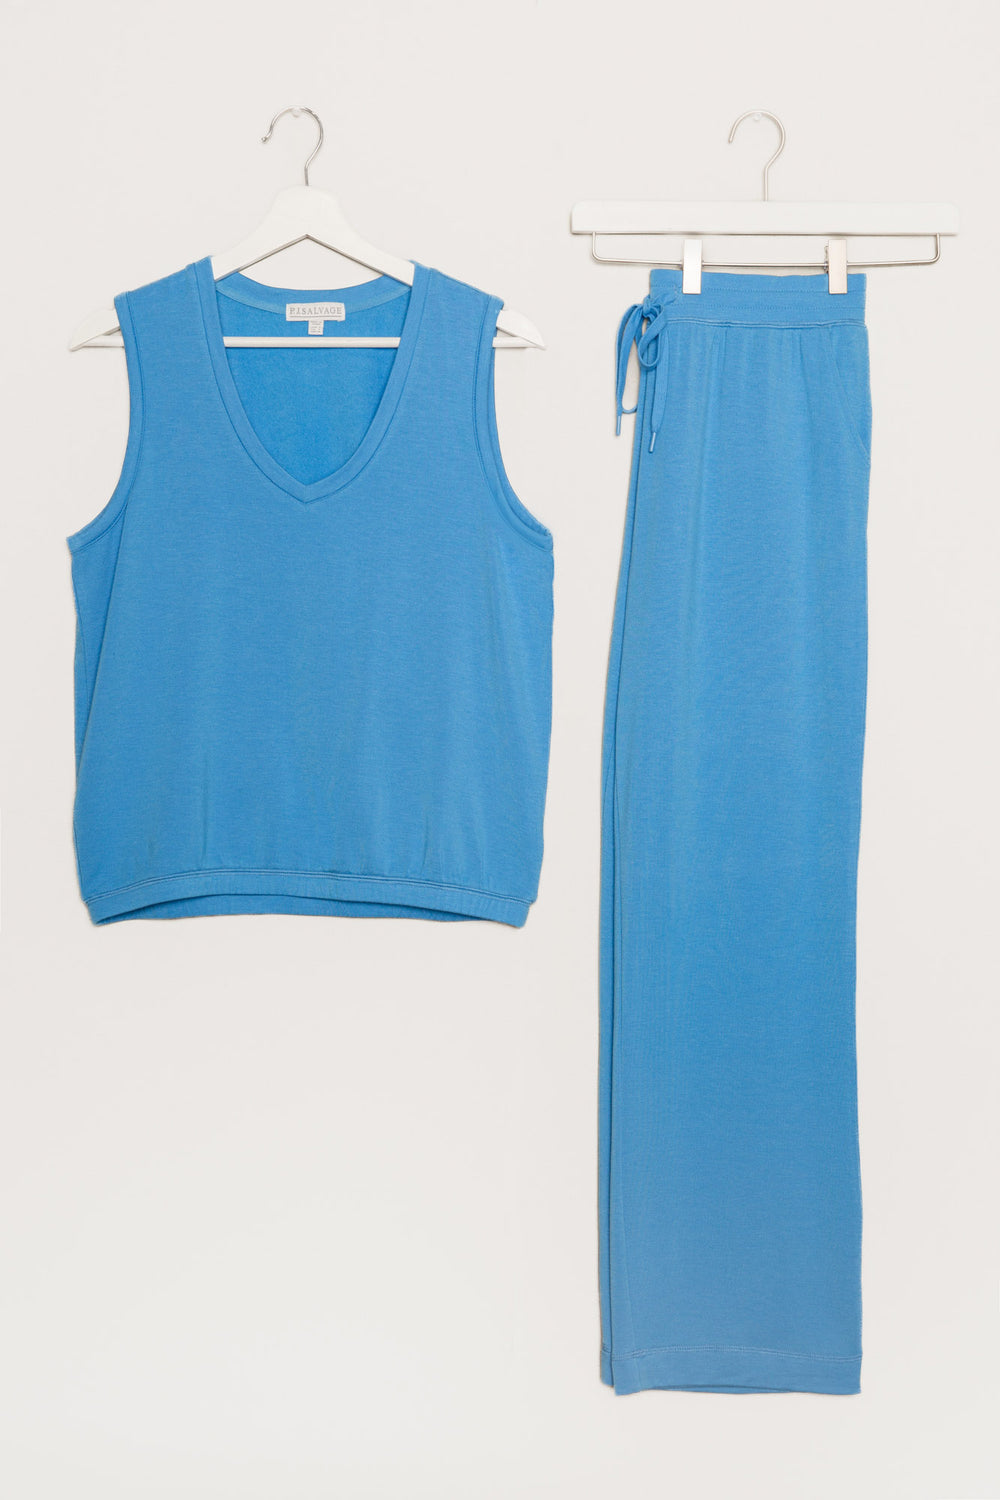 Matching lounge set in bright blue. V-neck tank top & cropped pj pant. (7205365284964)